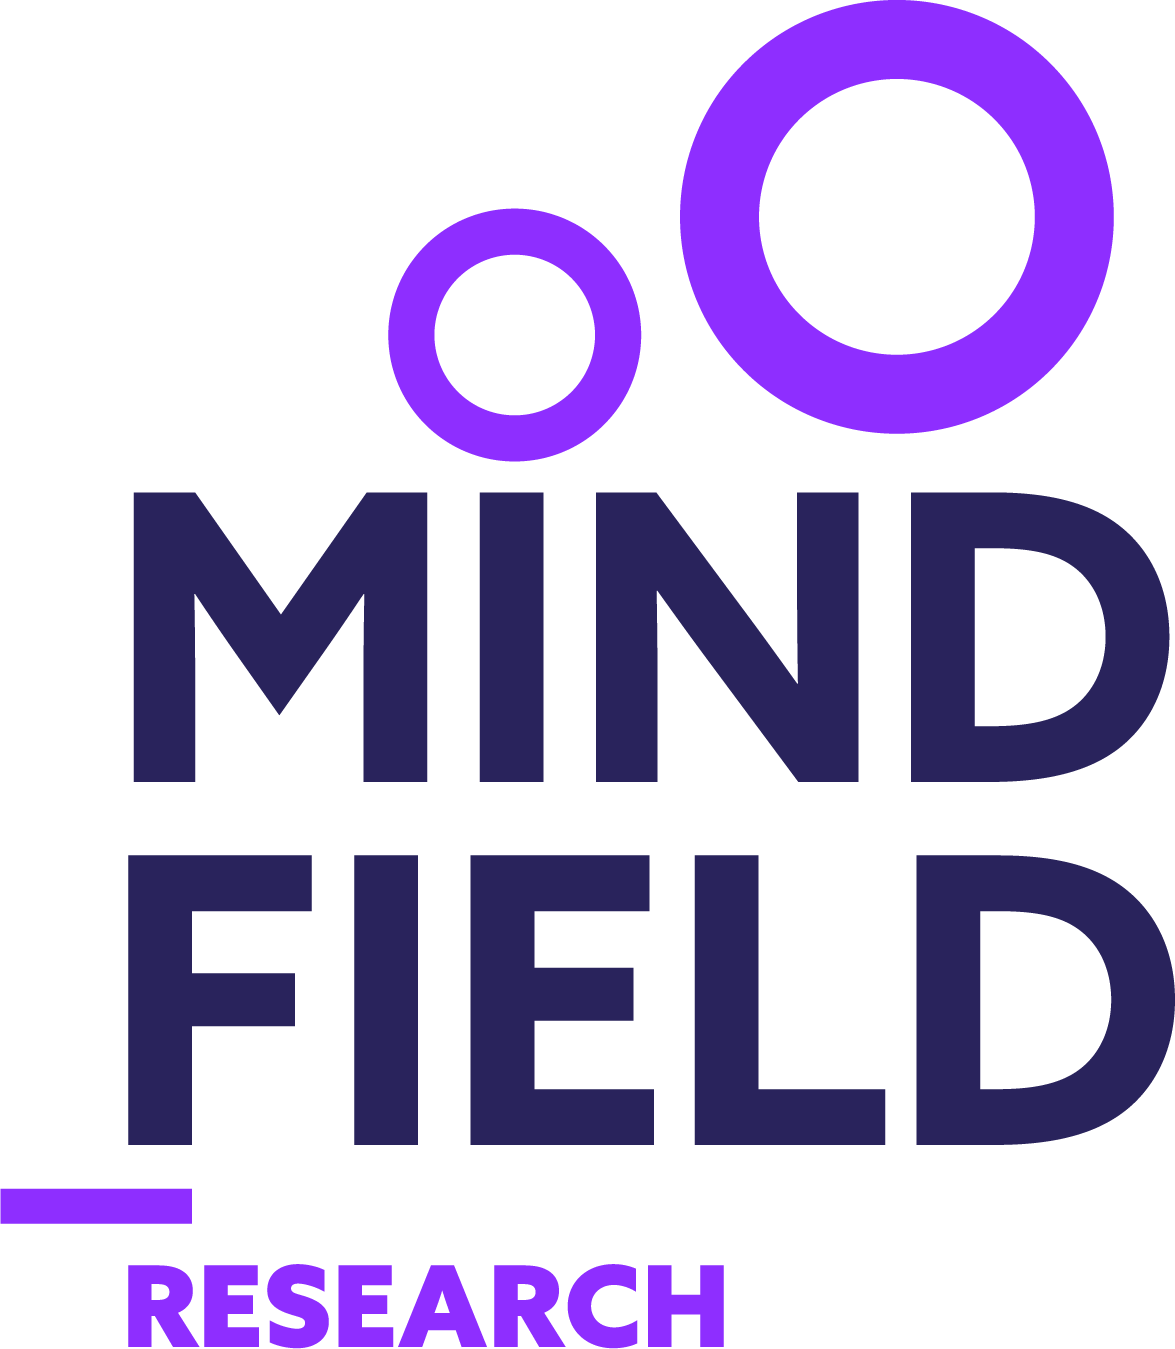 Mindfield Research